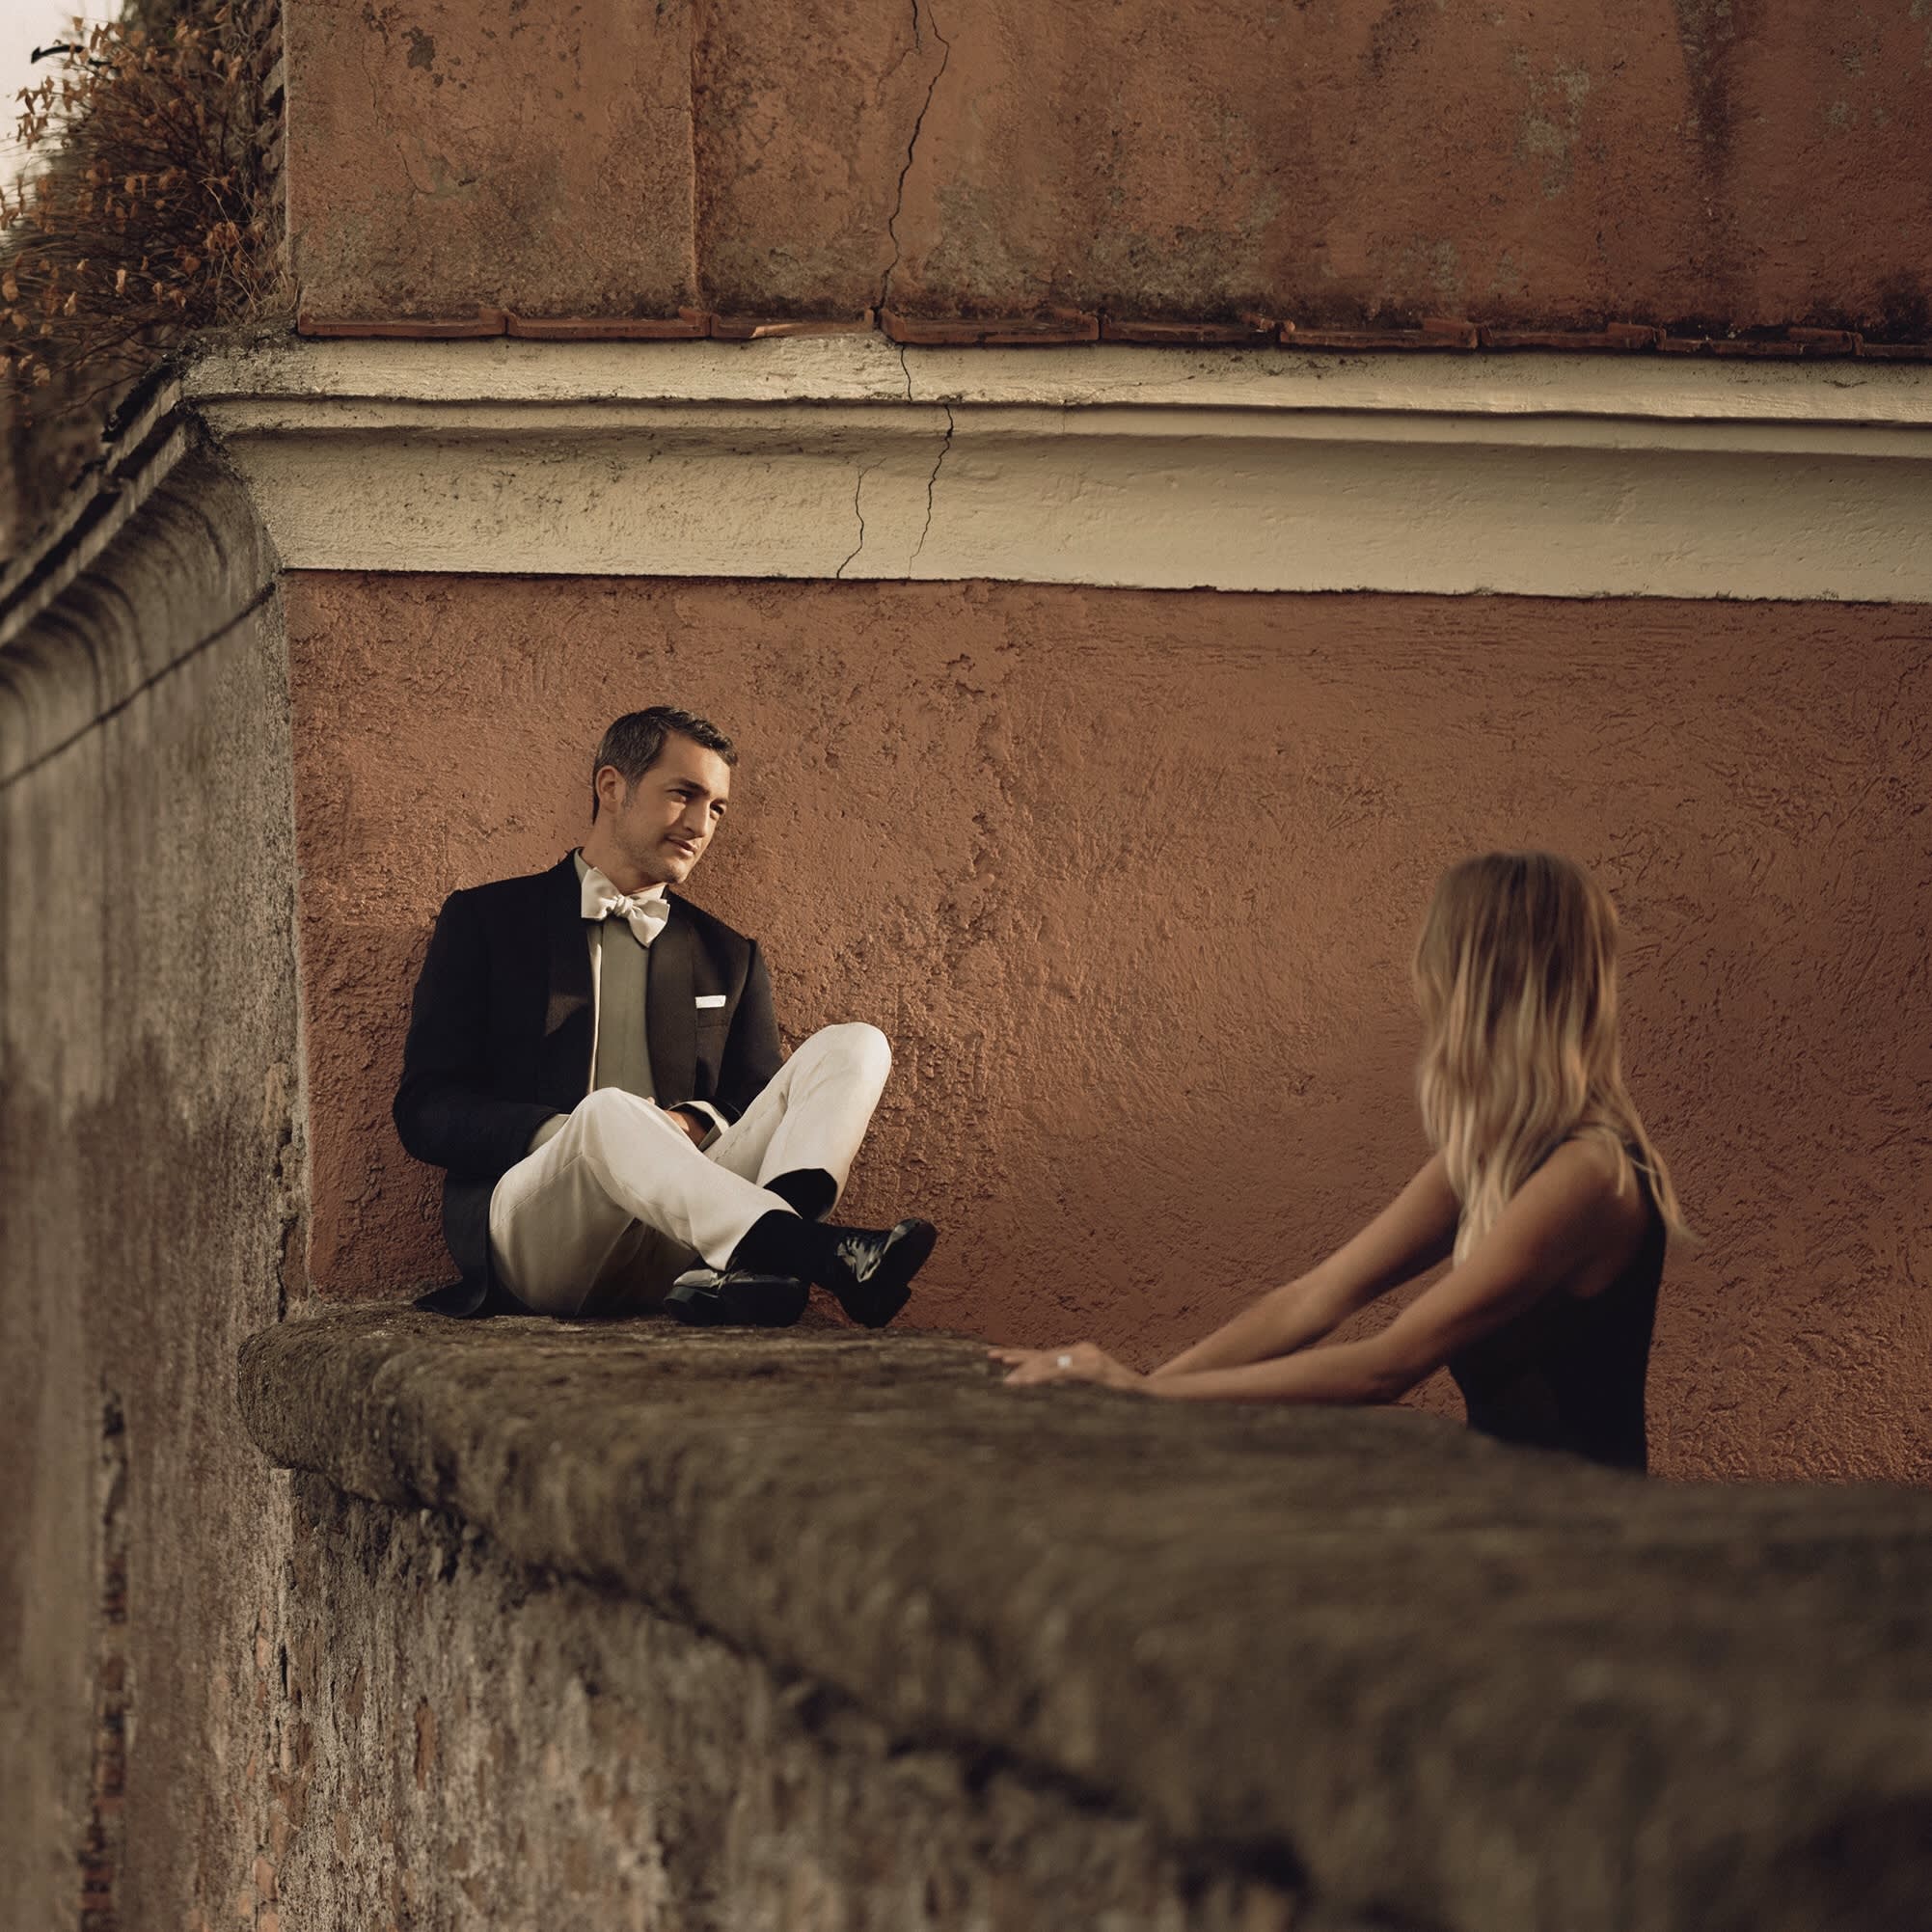 Brioni model and girl on terrace